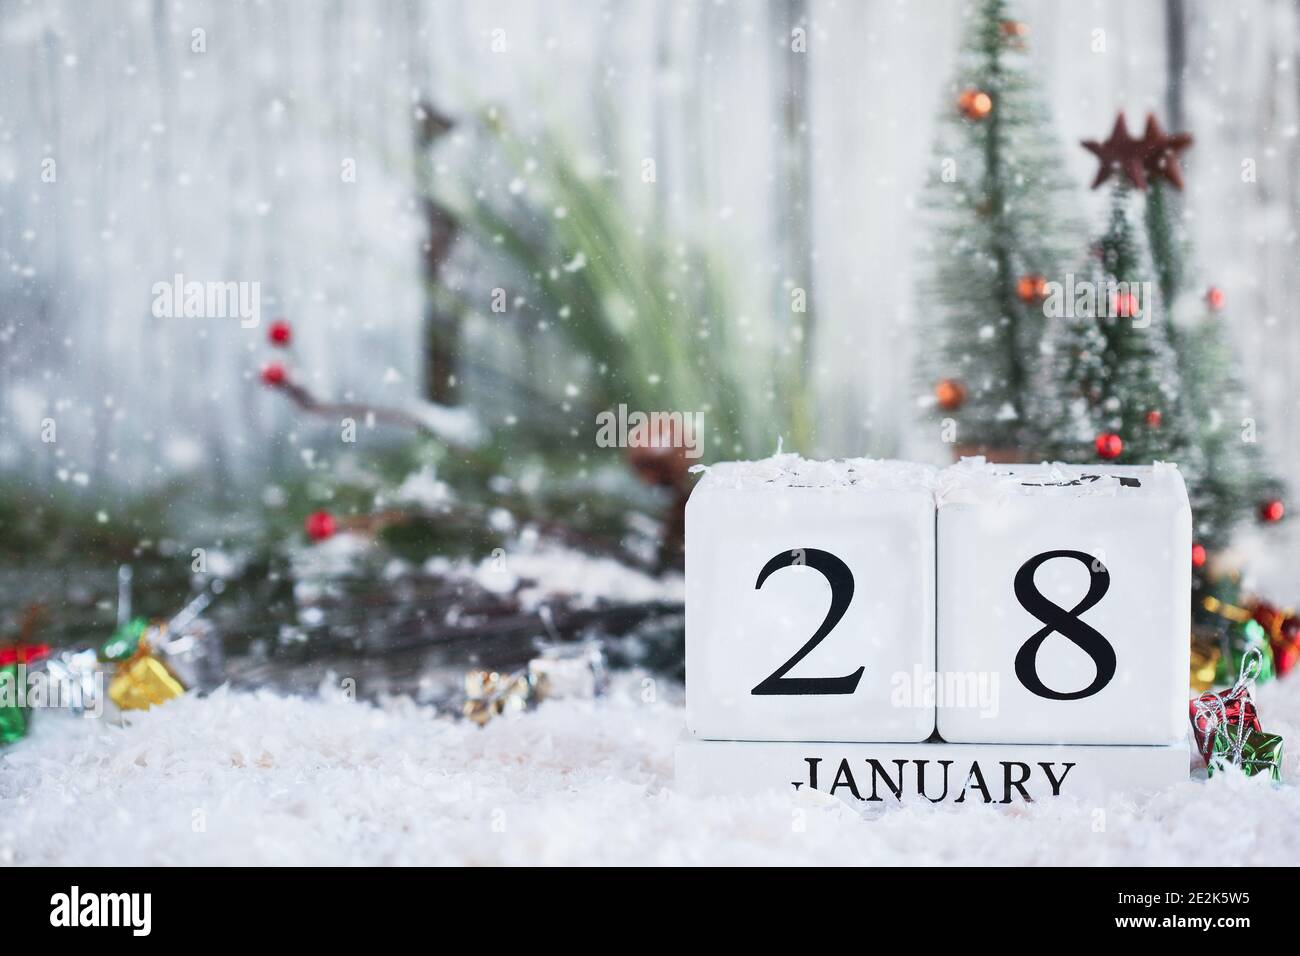 White wood calendar blocks with the date January 28th and Christmas decorations with snow. Selective focus with blurred background. Stock Photo